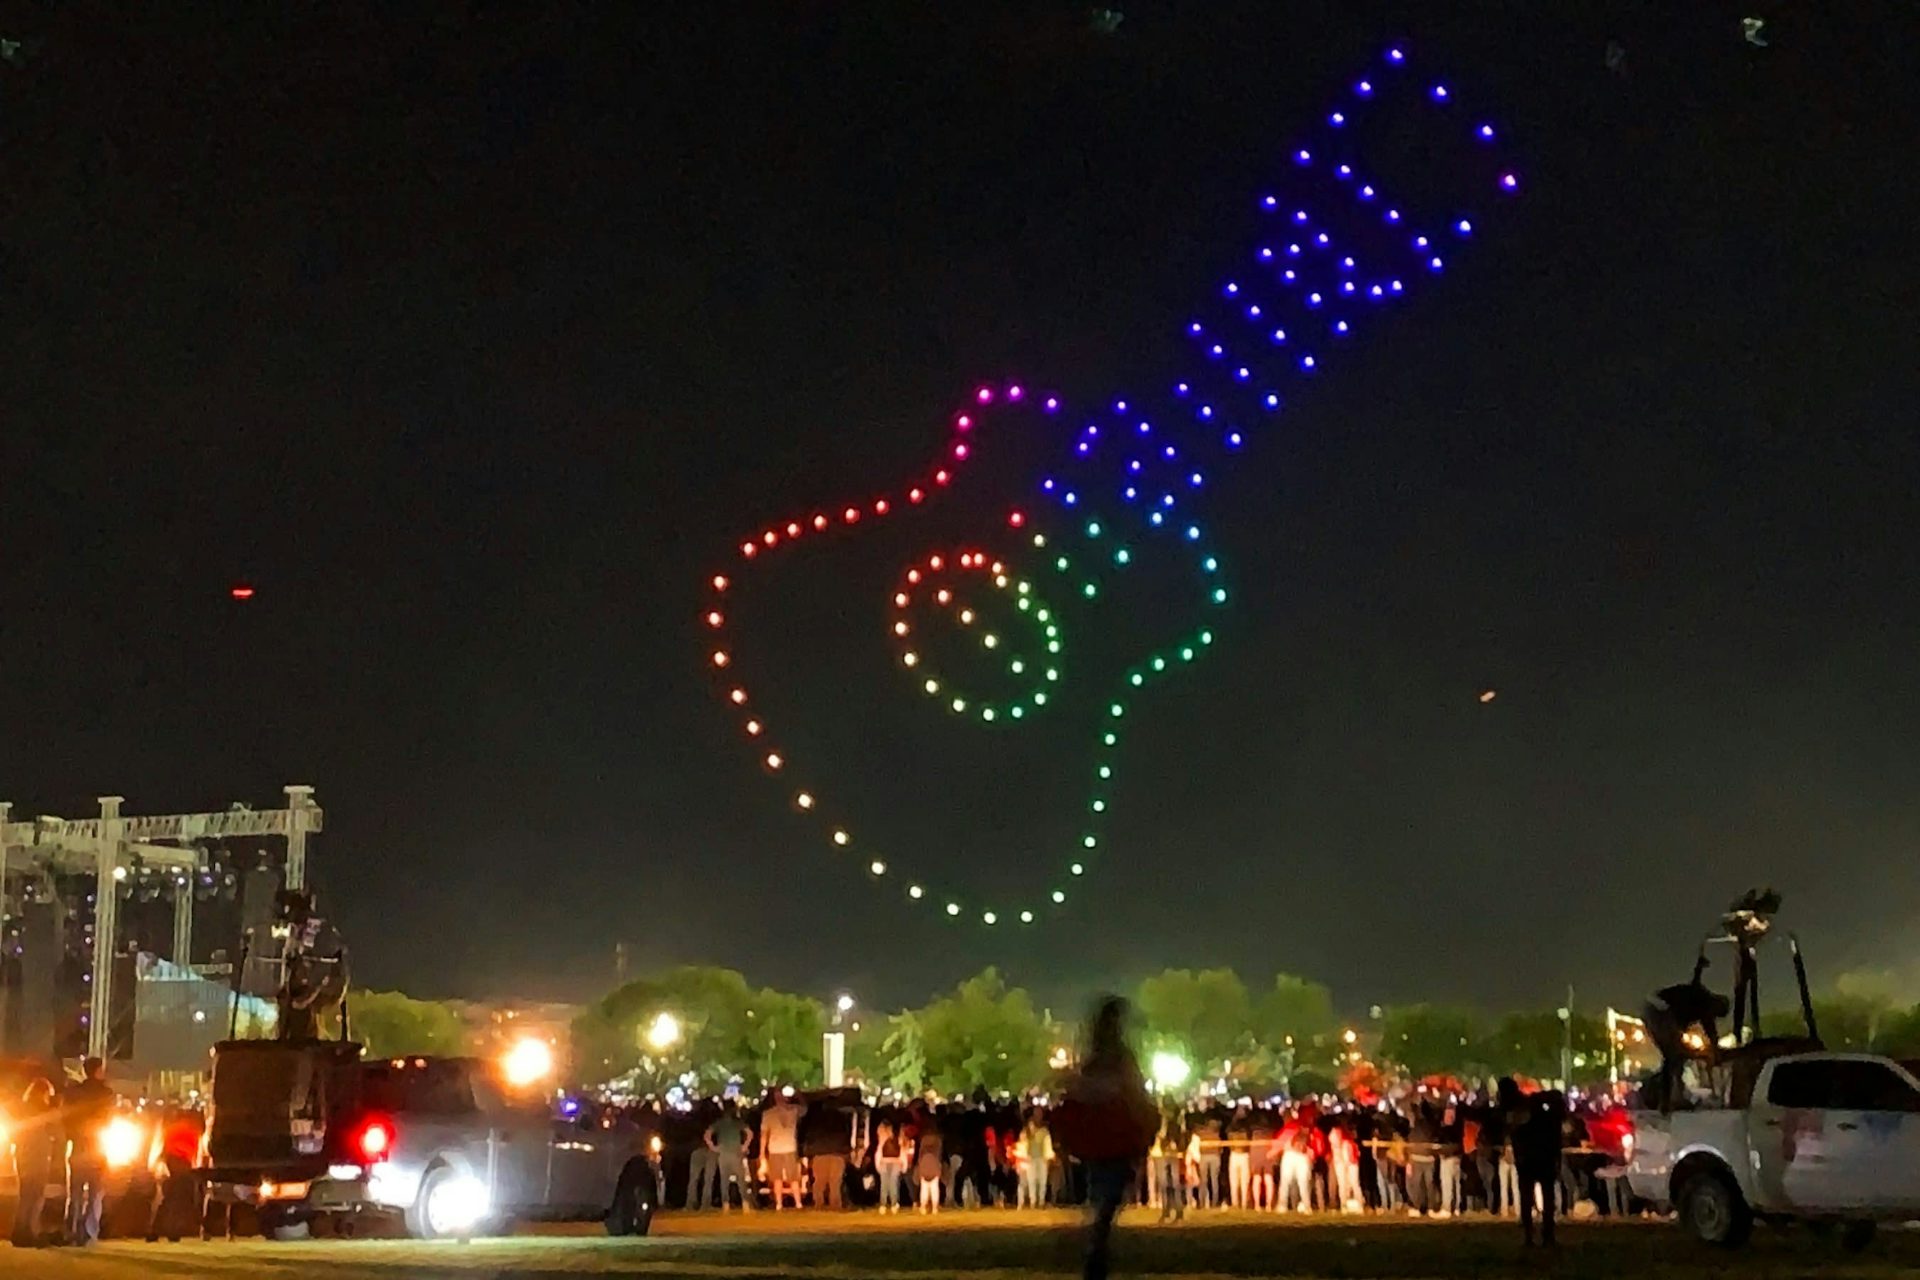 Verge Aero and Skylights flew 150 drones for FIG2019, delivering the country’s first ever drone light show!